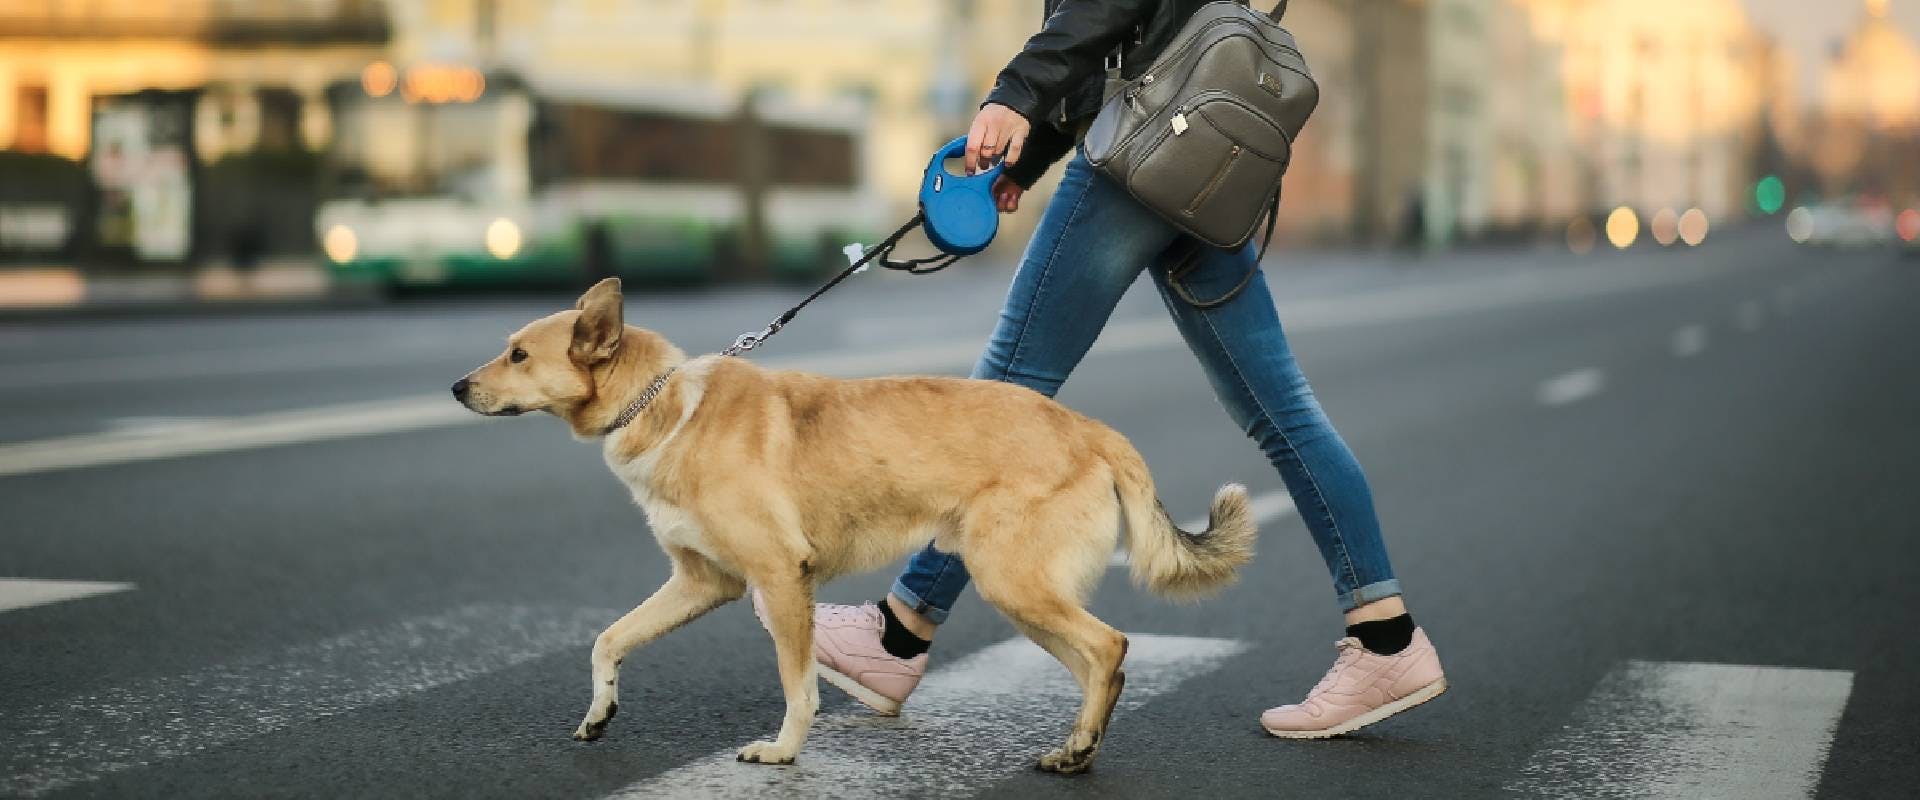 Dog and woman crossing the road